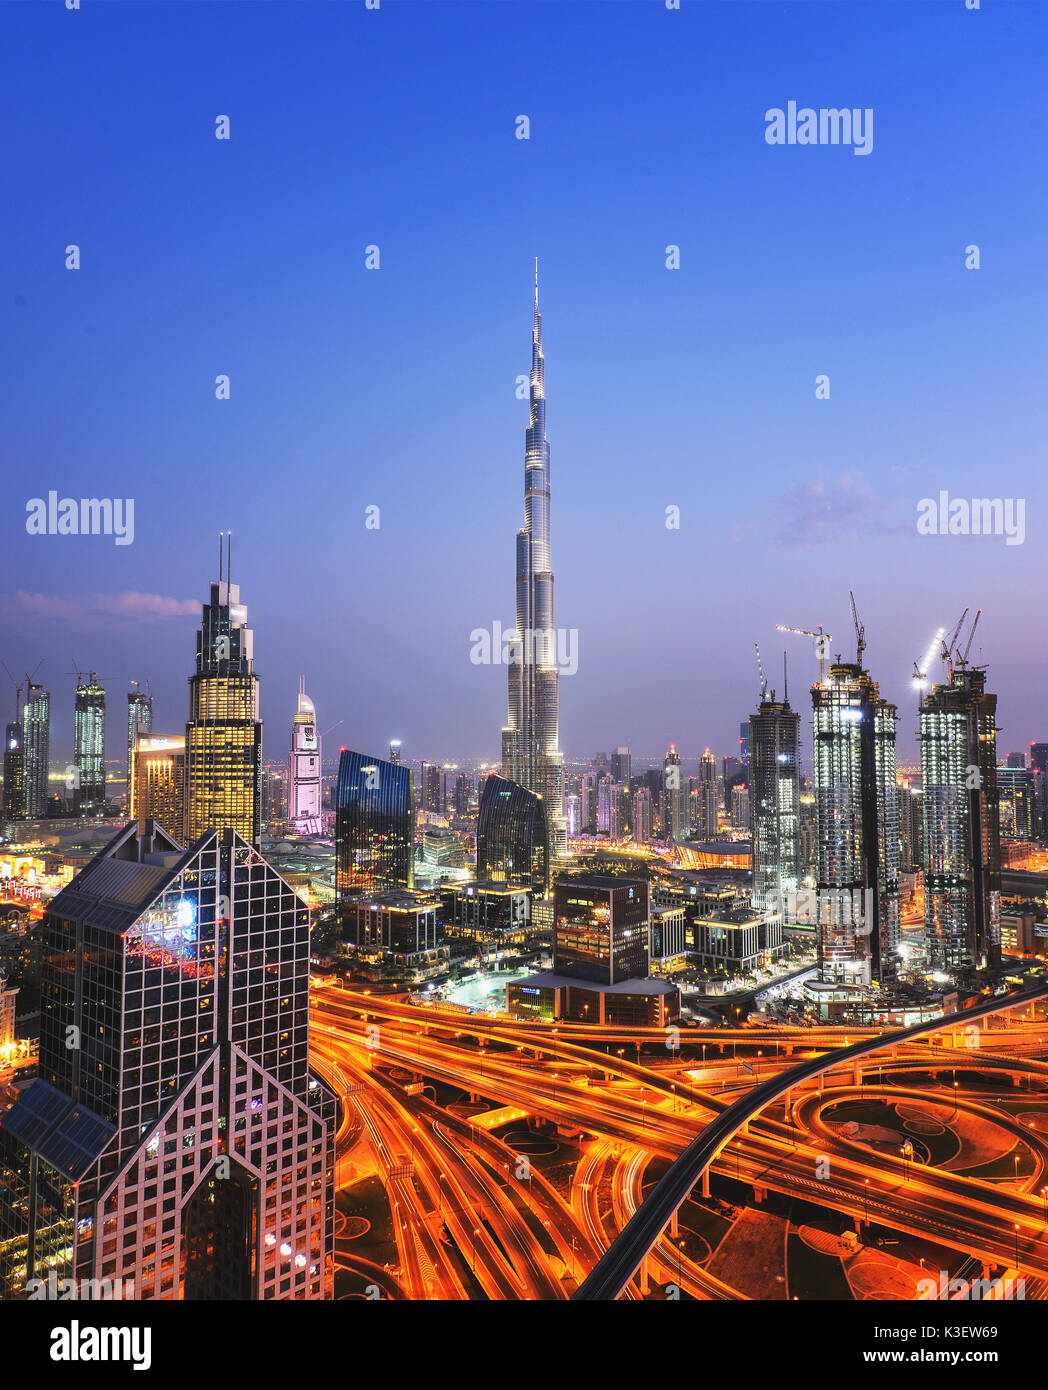 The Burj Khalifa tower at night. This skyscraper is the tallest man-made structure in the world, measuring 828 m. Completed in 2009. Stock Photo